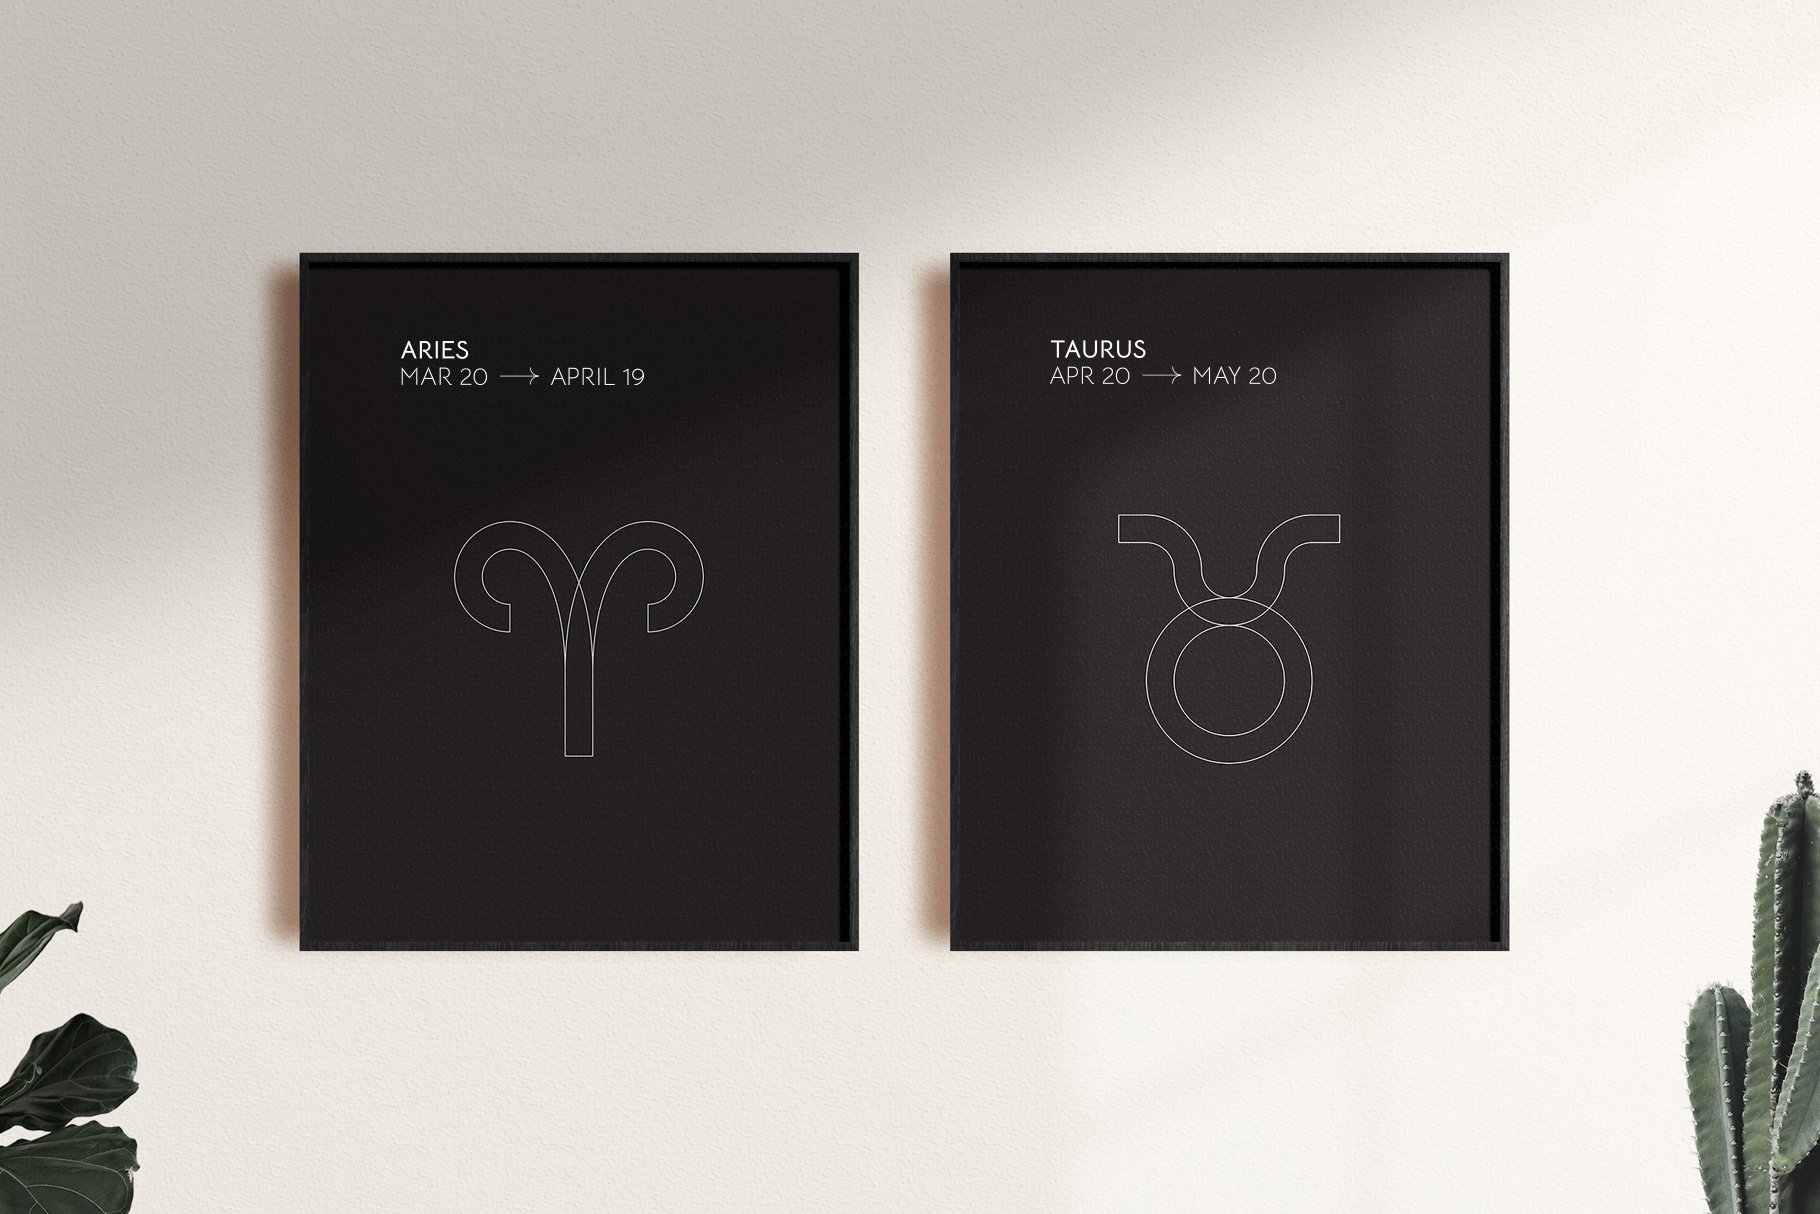 Two posters with the outlines Aries and Taurus signs.